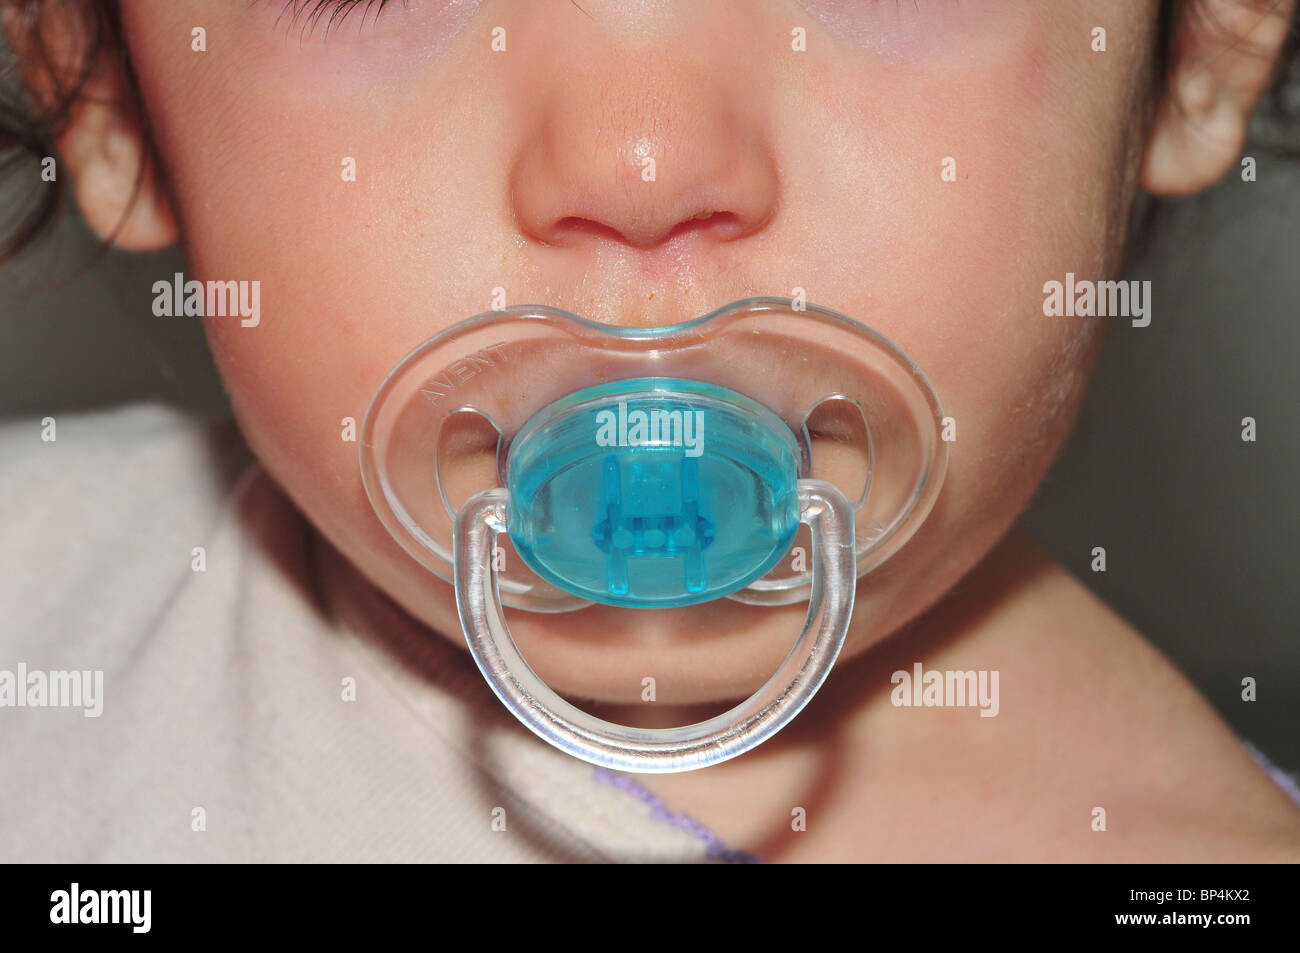 Baby with pacifier in her mouth = Model Release Available Stock Photo